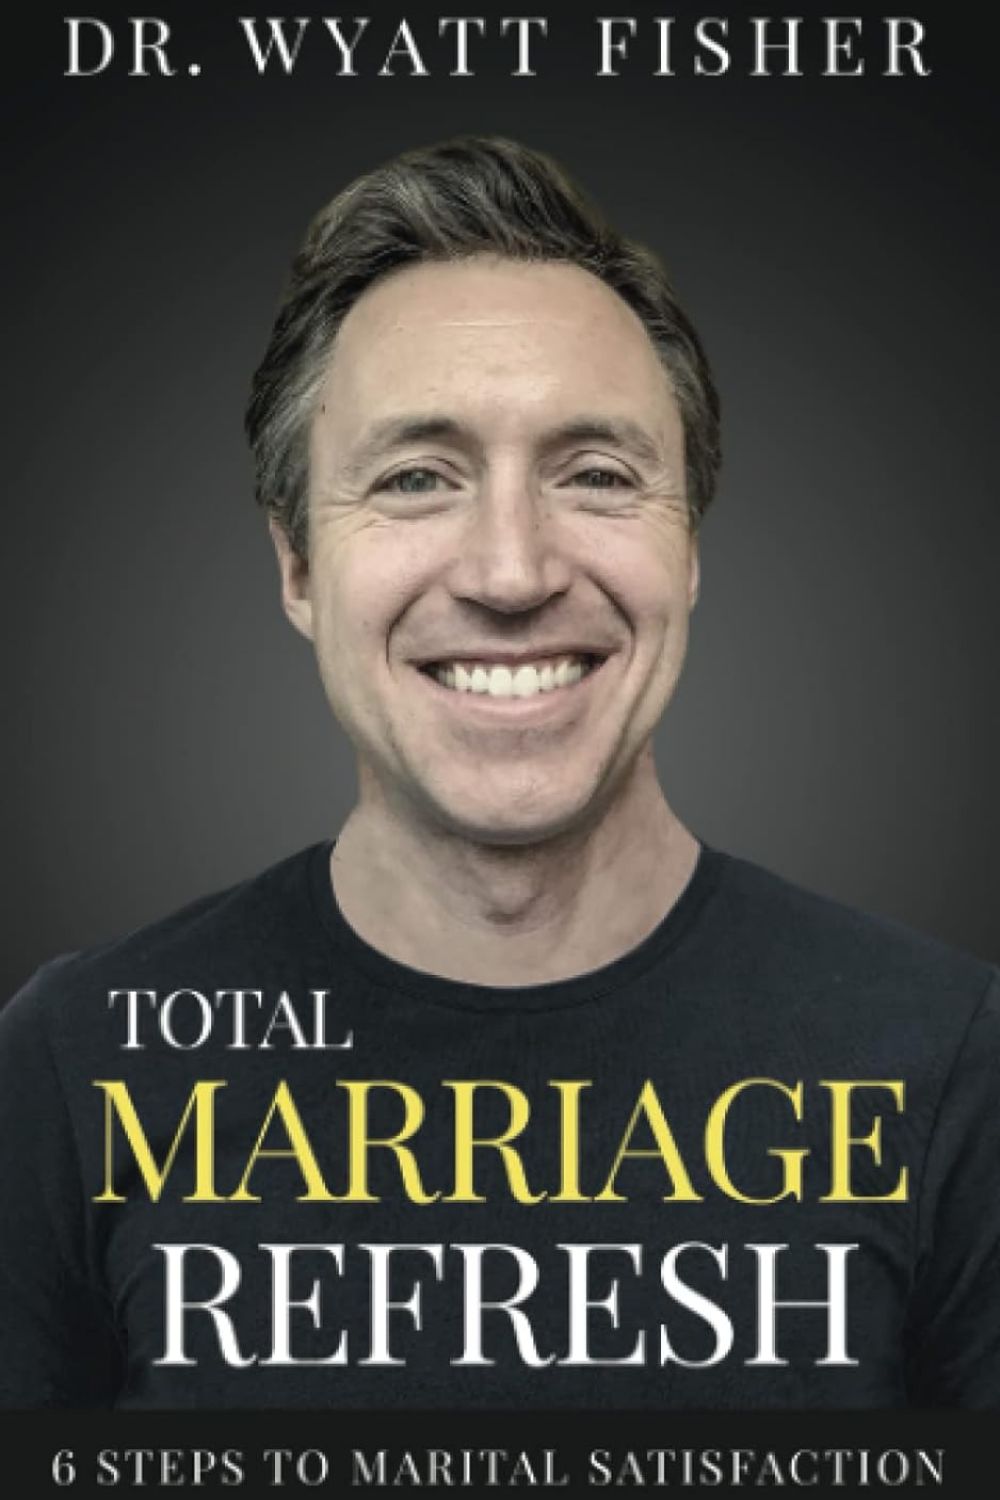 Total Marriage Refresh by Dr. Wyatt Fisher